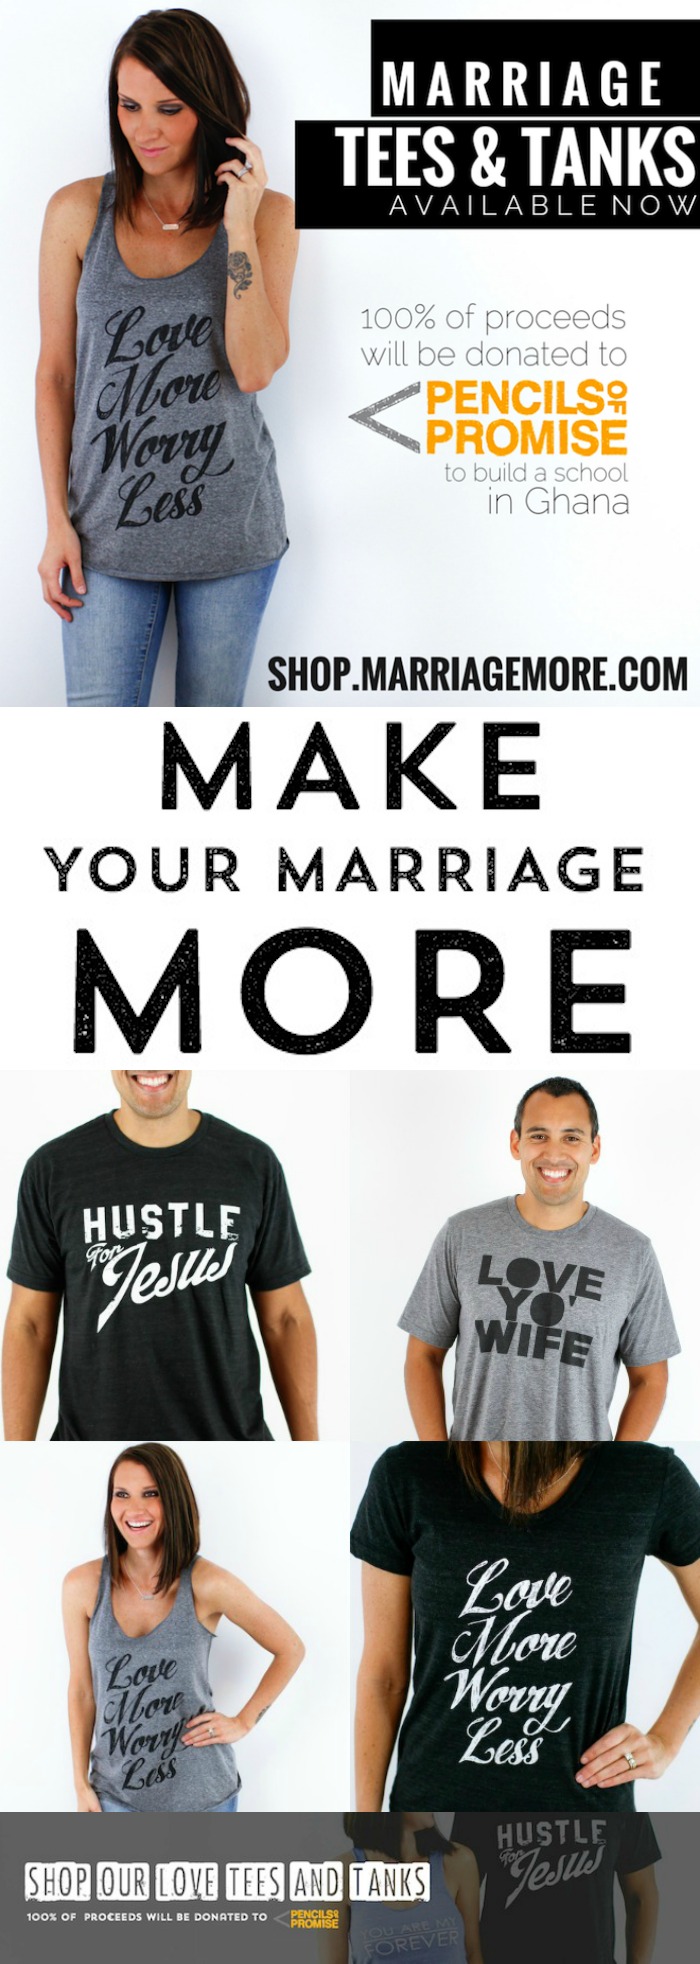 Marriage Tees and Tanks by houseofroseblog.com 